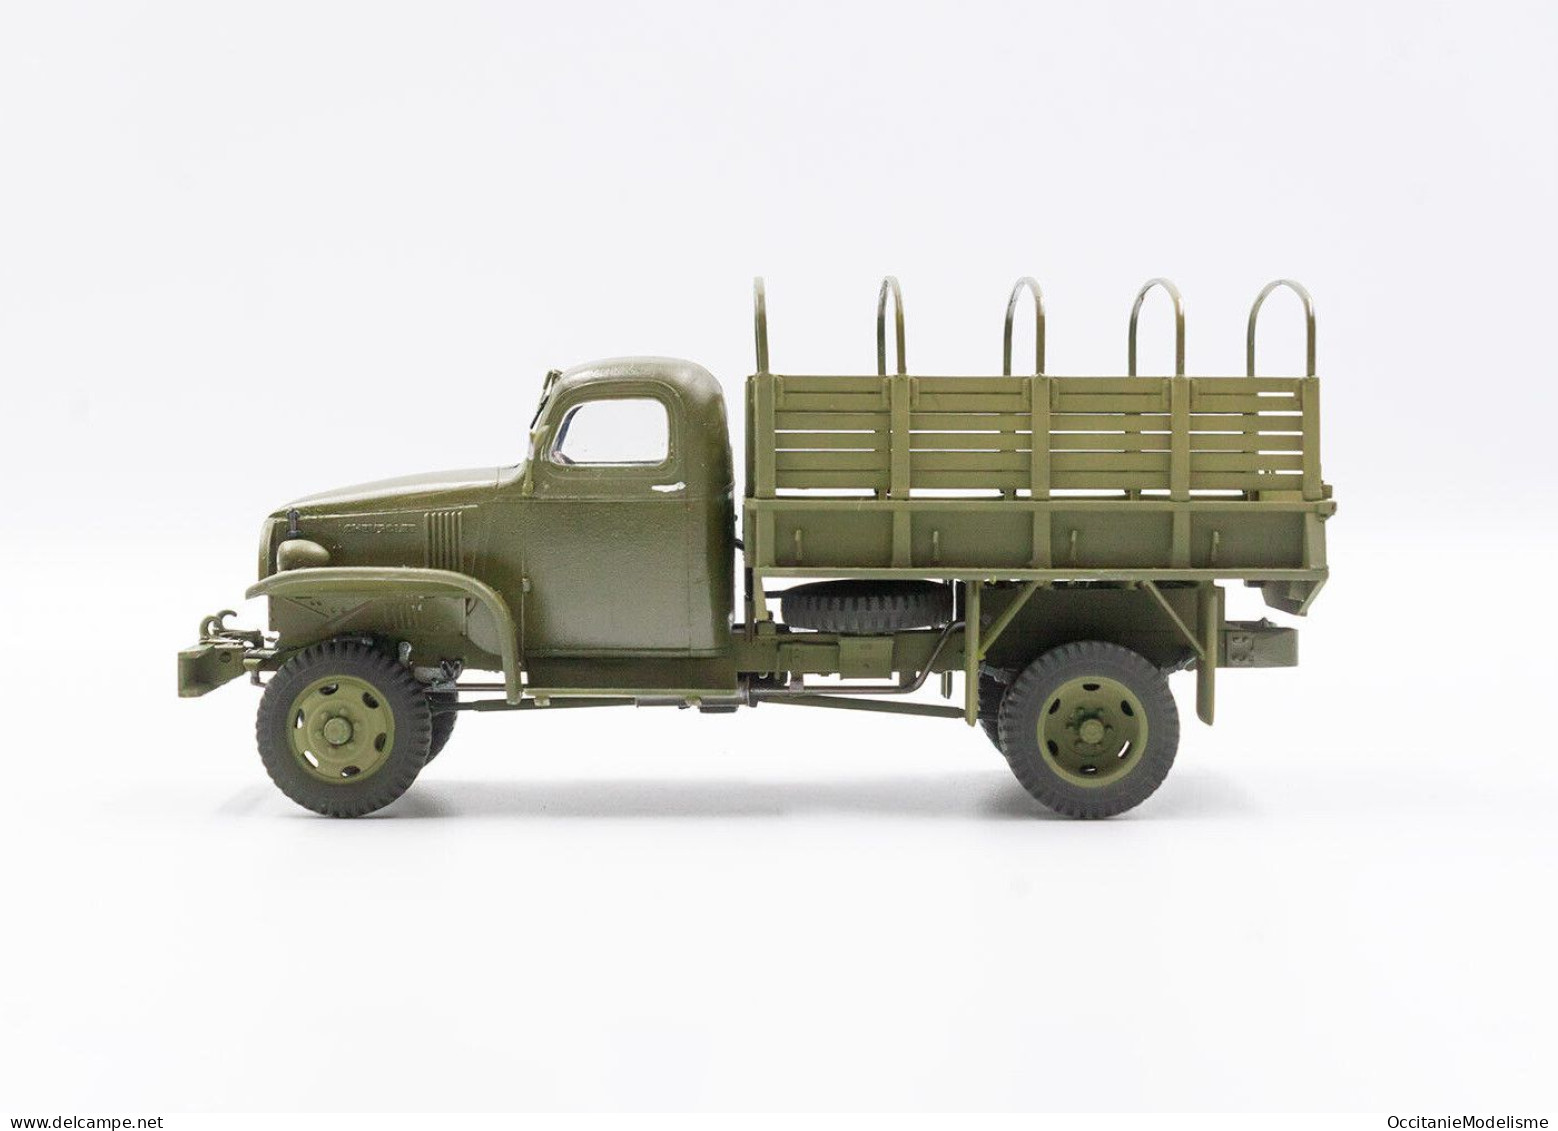 ICM - CHEVROLET G7107 WWII Army Truck Maquette Kit Plastique Réf. 35593 Neuf NBO 1/35 - Véhicules Militaires